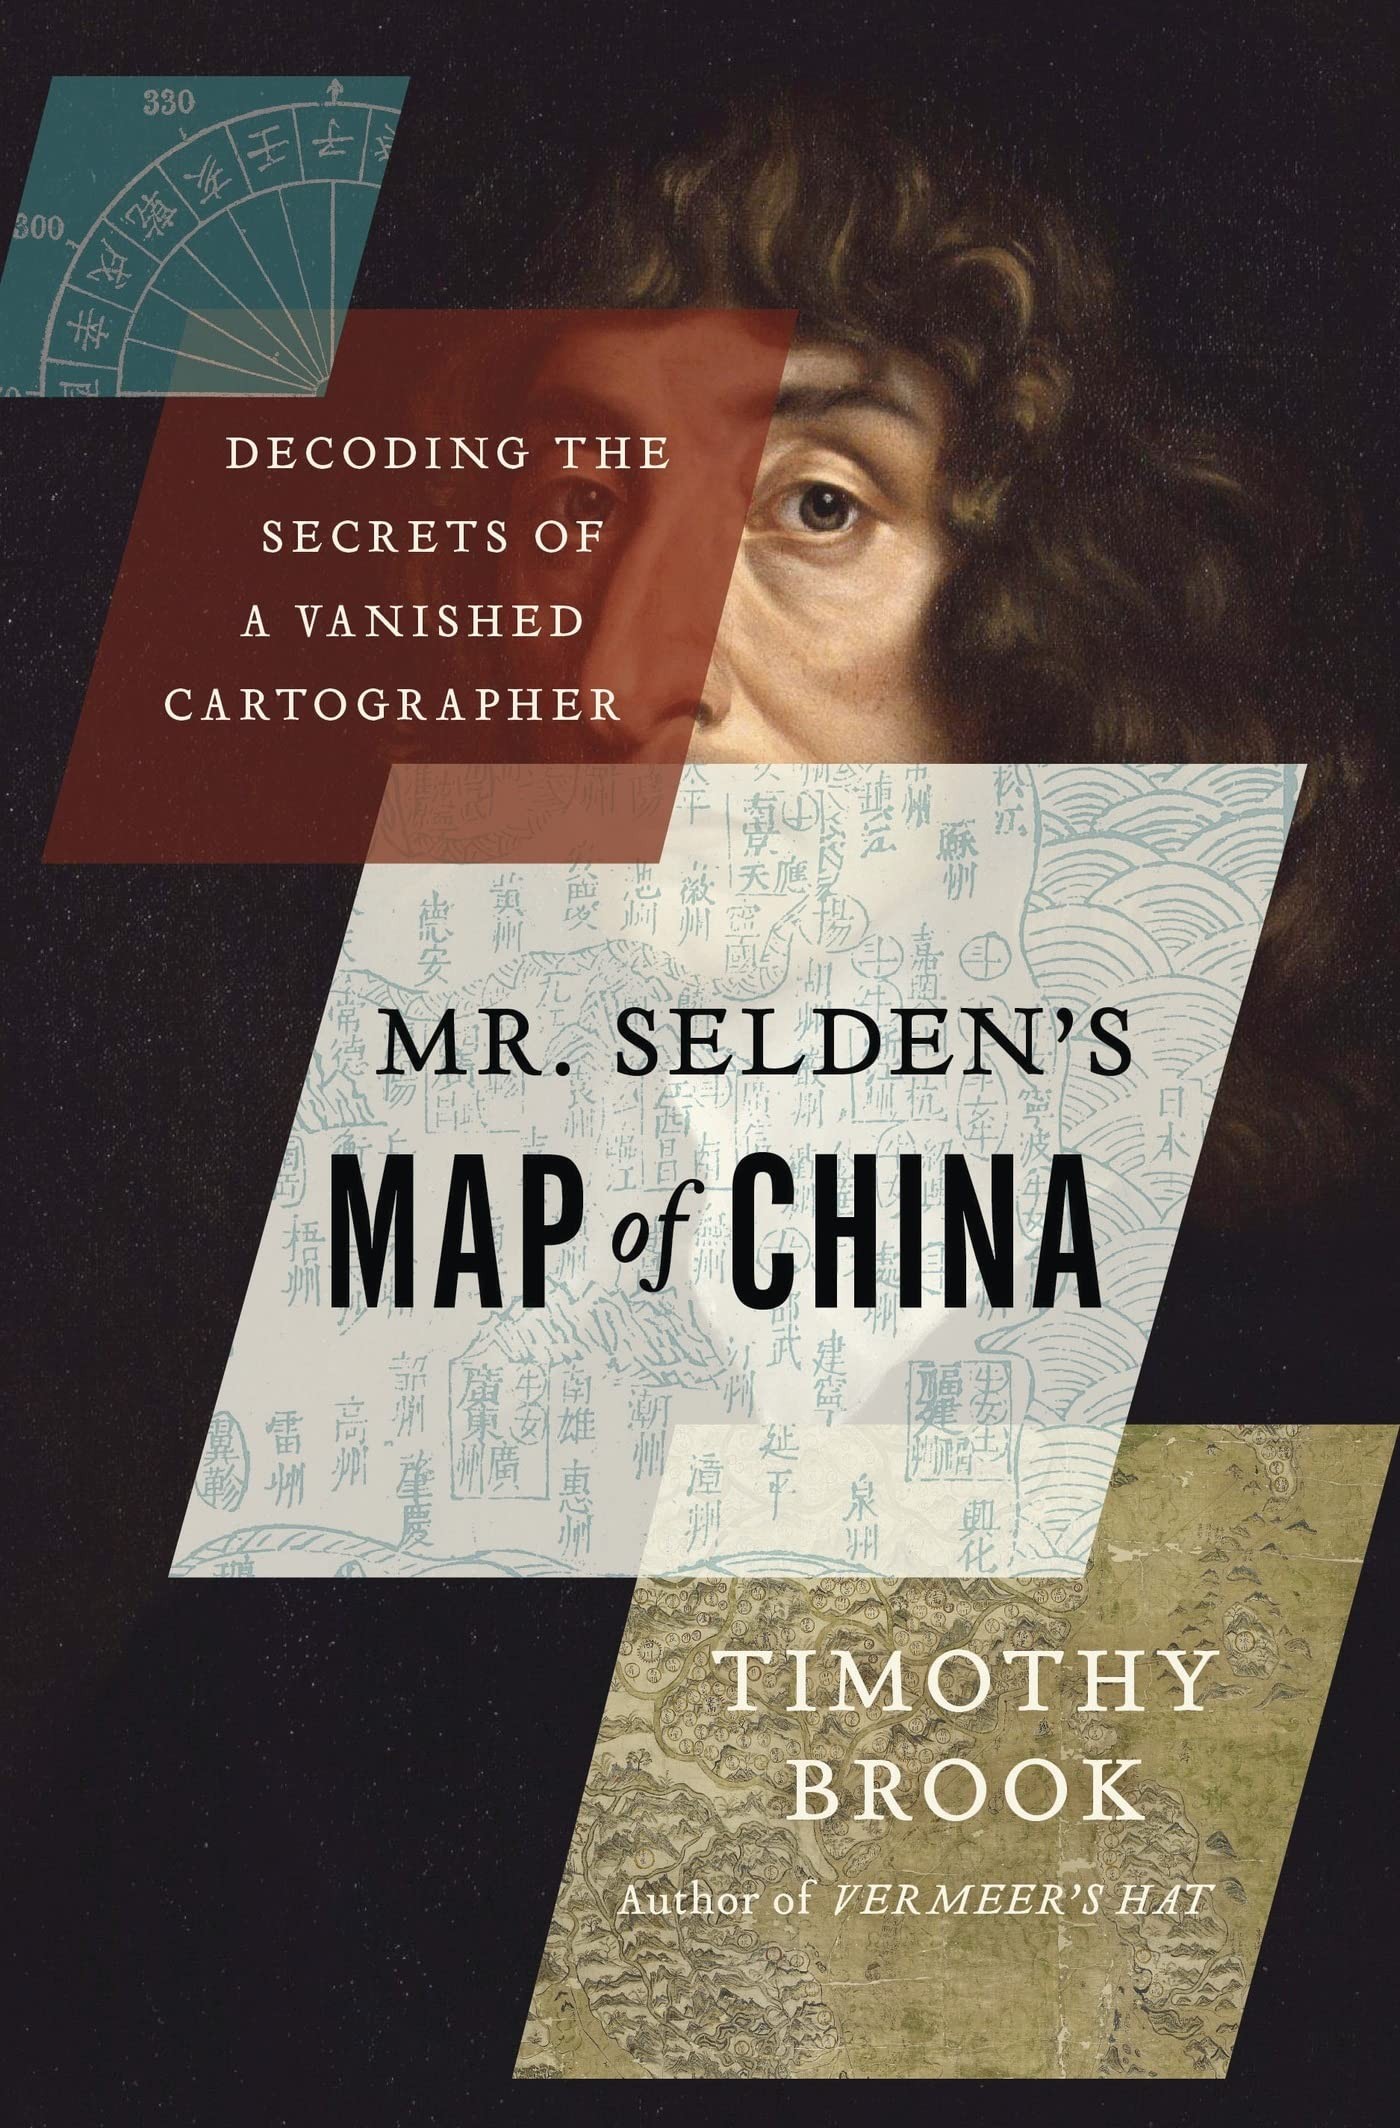 Mr Selden's Map of China: Decoding the Secrets of a Vanished Cartographer